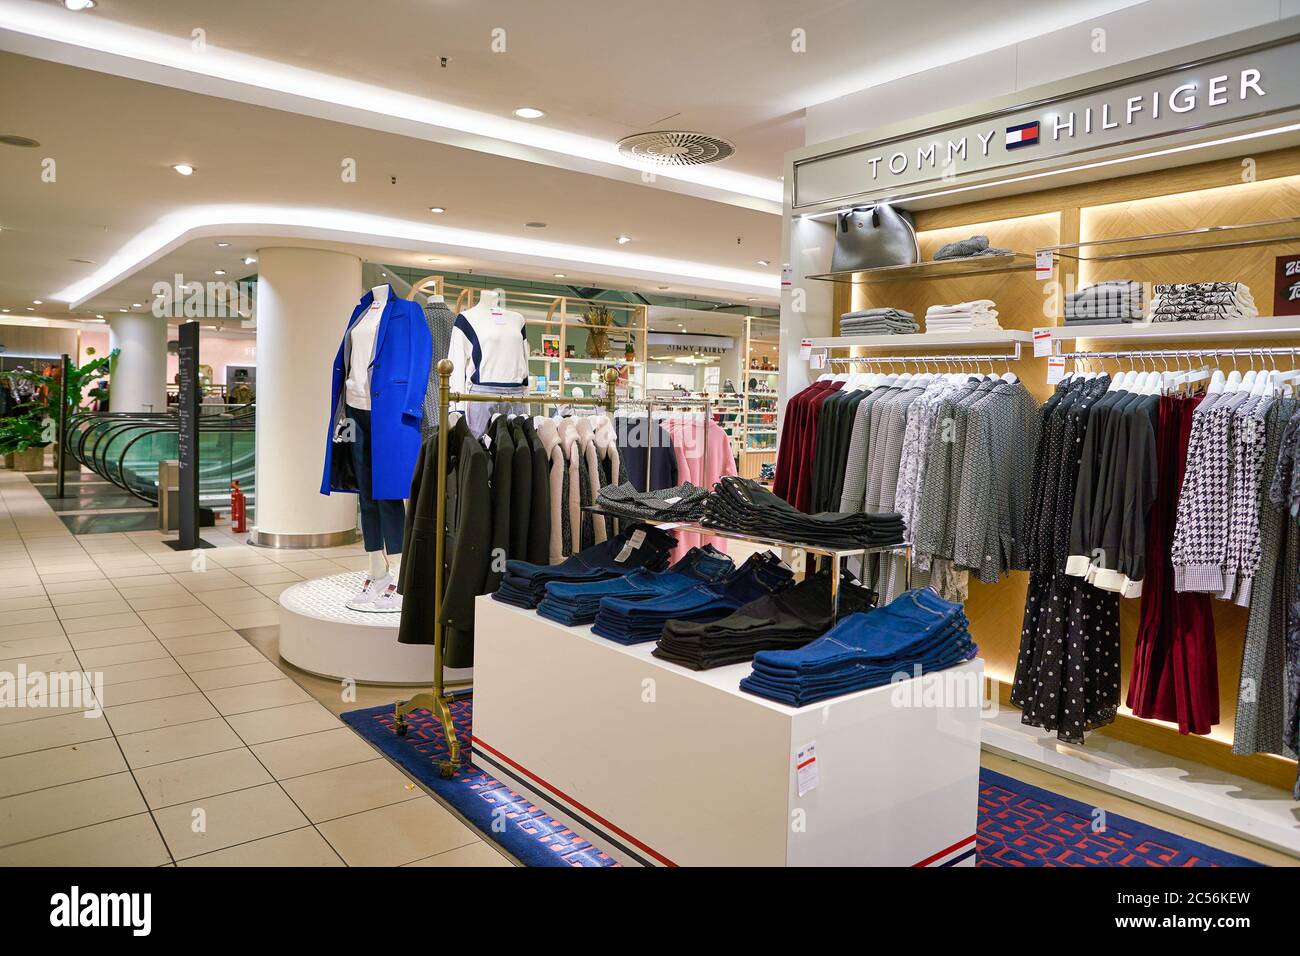 BERLIN, GERMANY - CIRCA SEPTEMBER, 2019: Tommy Hilfiger clothes on display  at the Kaufhaus des Westens (KaDeWe) department store in Berlin Stock Photo  - Alamy